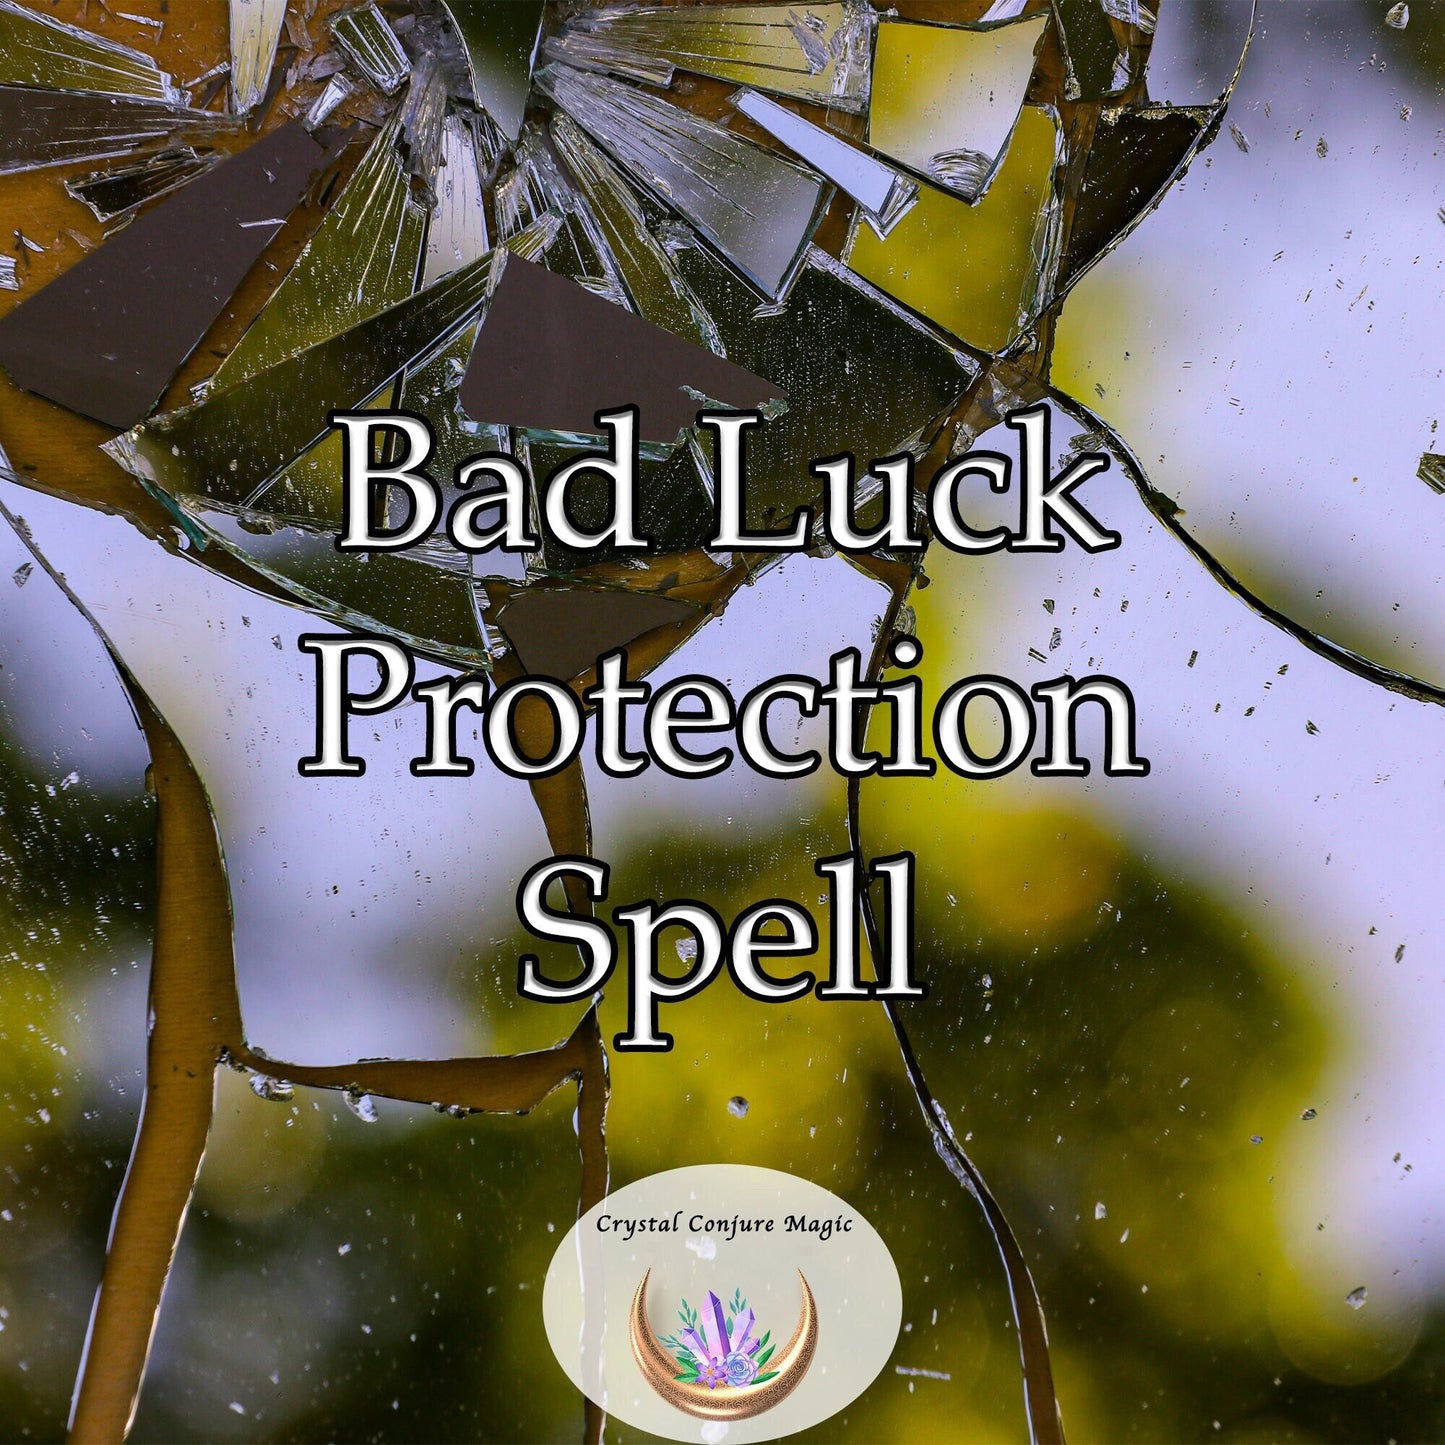 Bad Luck Protection Spell - keep the bad luck at bay and guard against the unseen negative forces that encroach on your path.